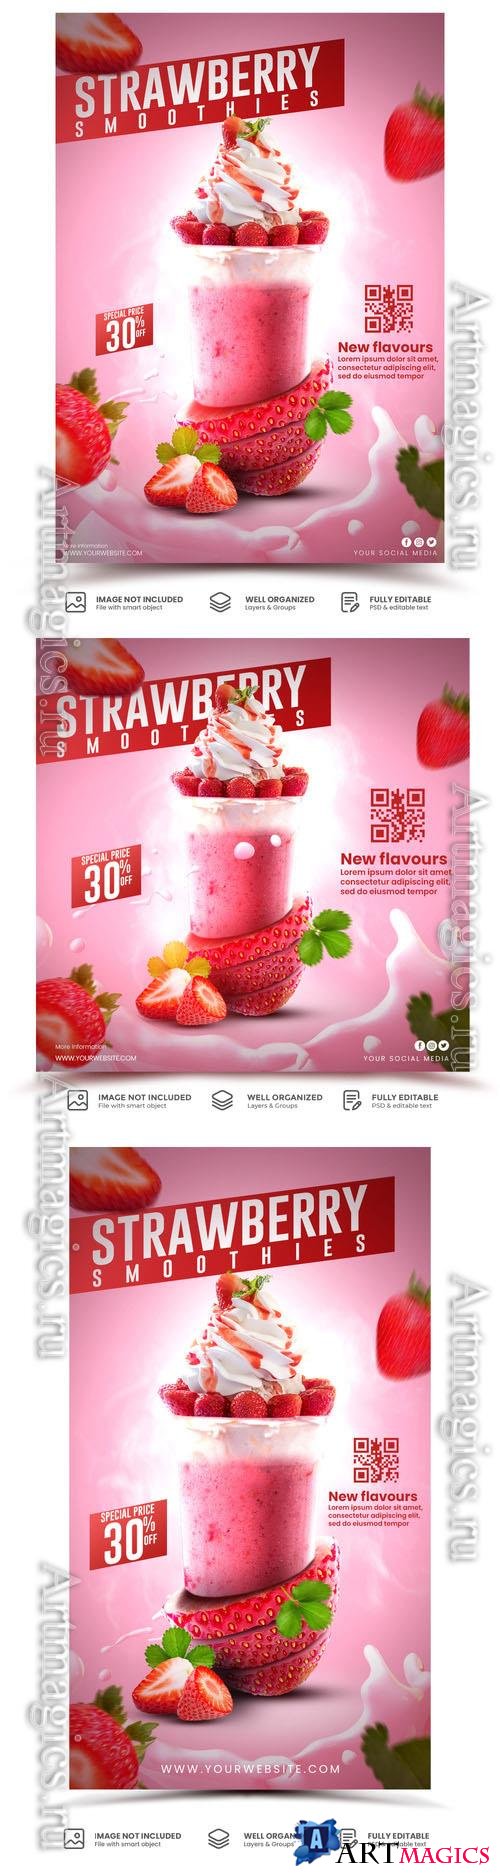 PSD strawberry smoothies drink menu flyer template